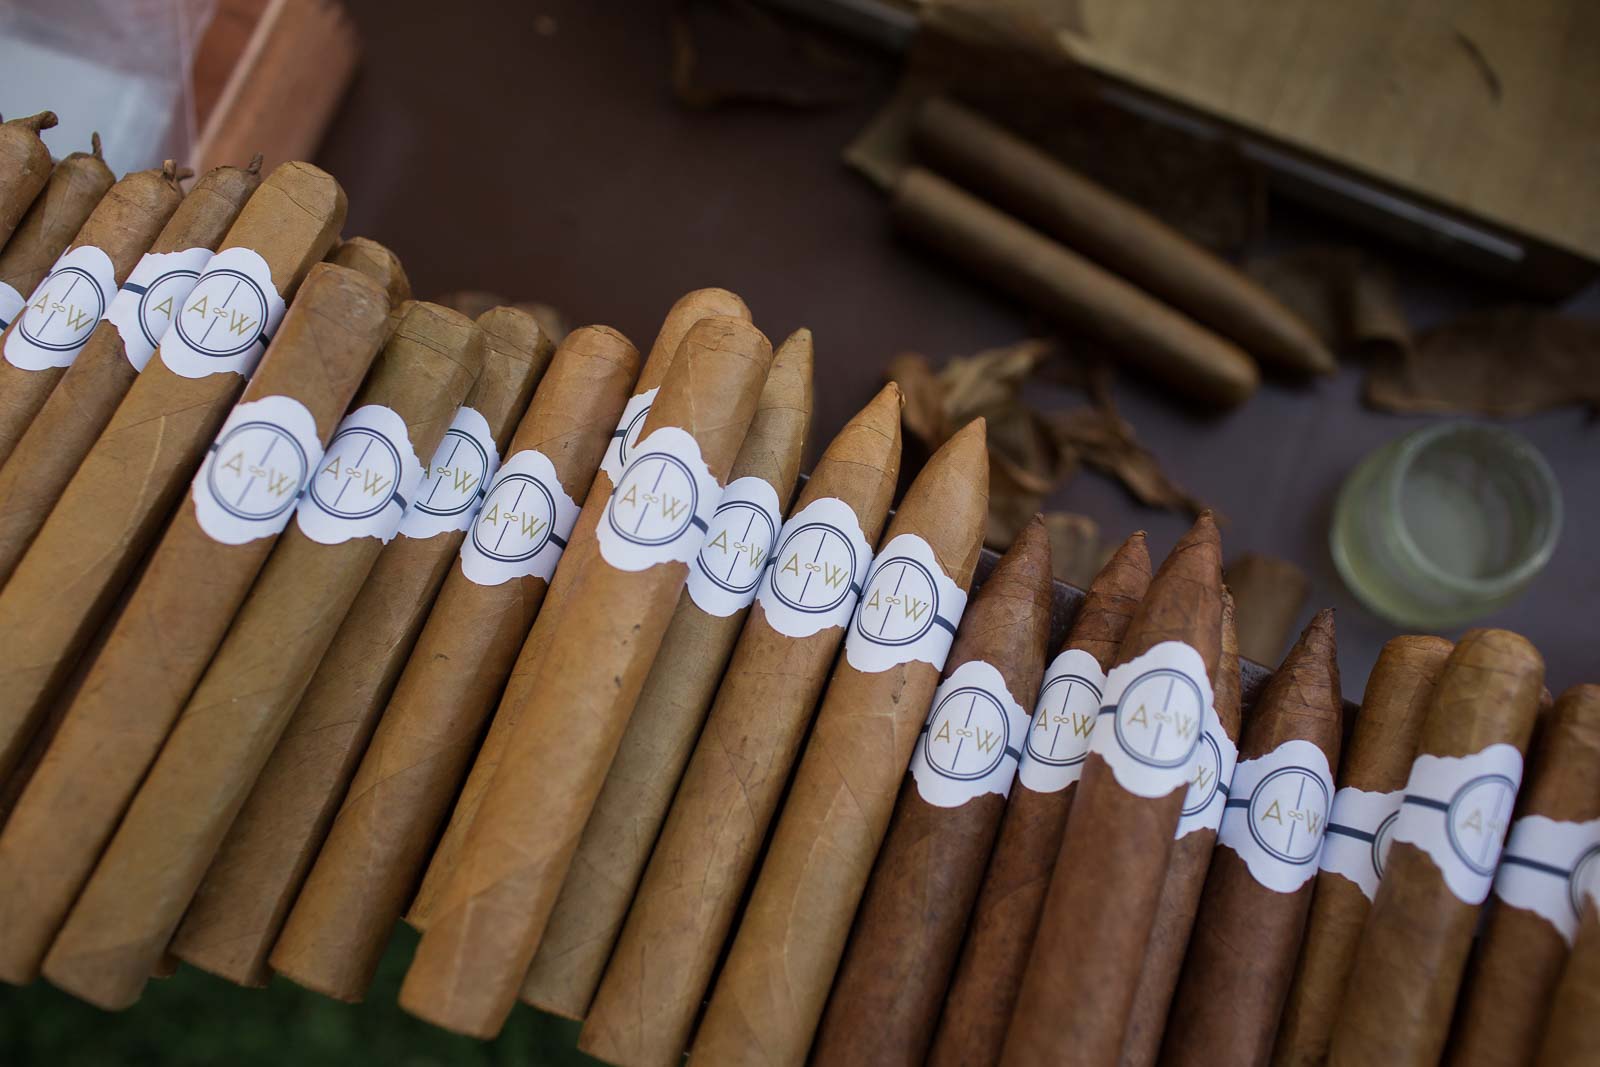 A close up of some cigars with a few on the side